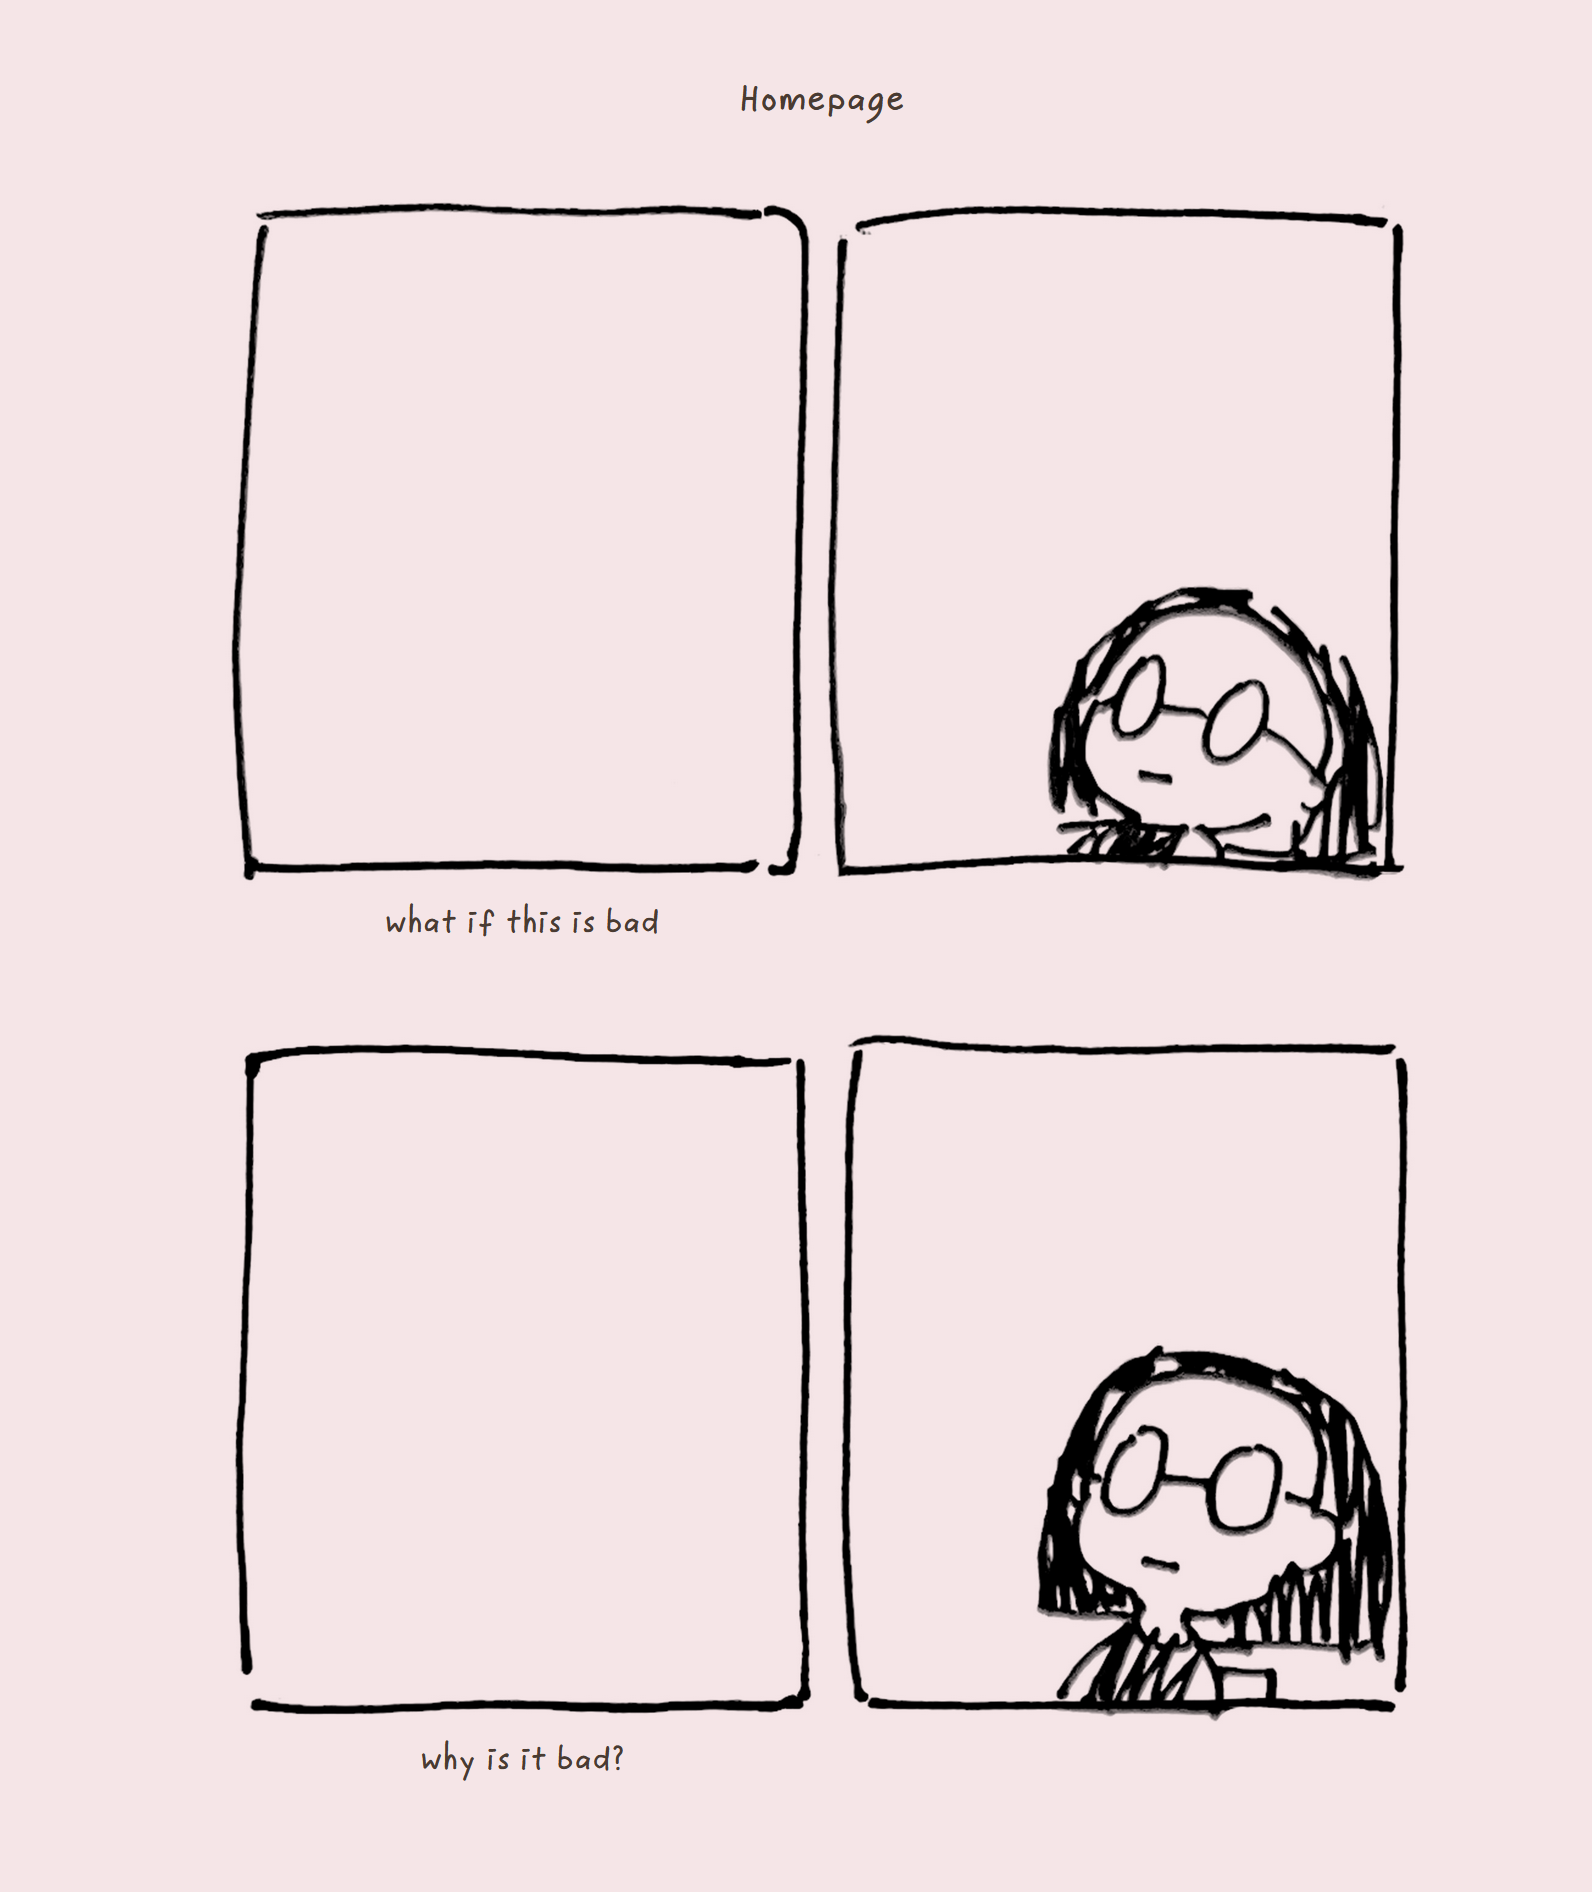 My 'Homepage' comic, where I ponder 'what if this is bad?' and then 'why is it bad?'